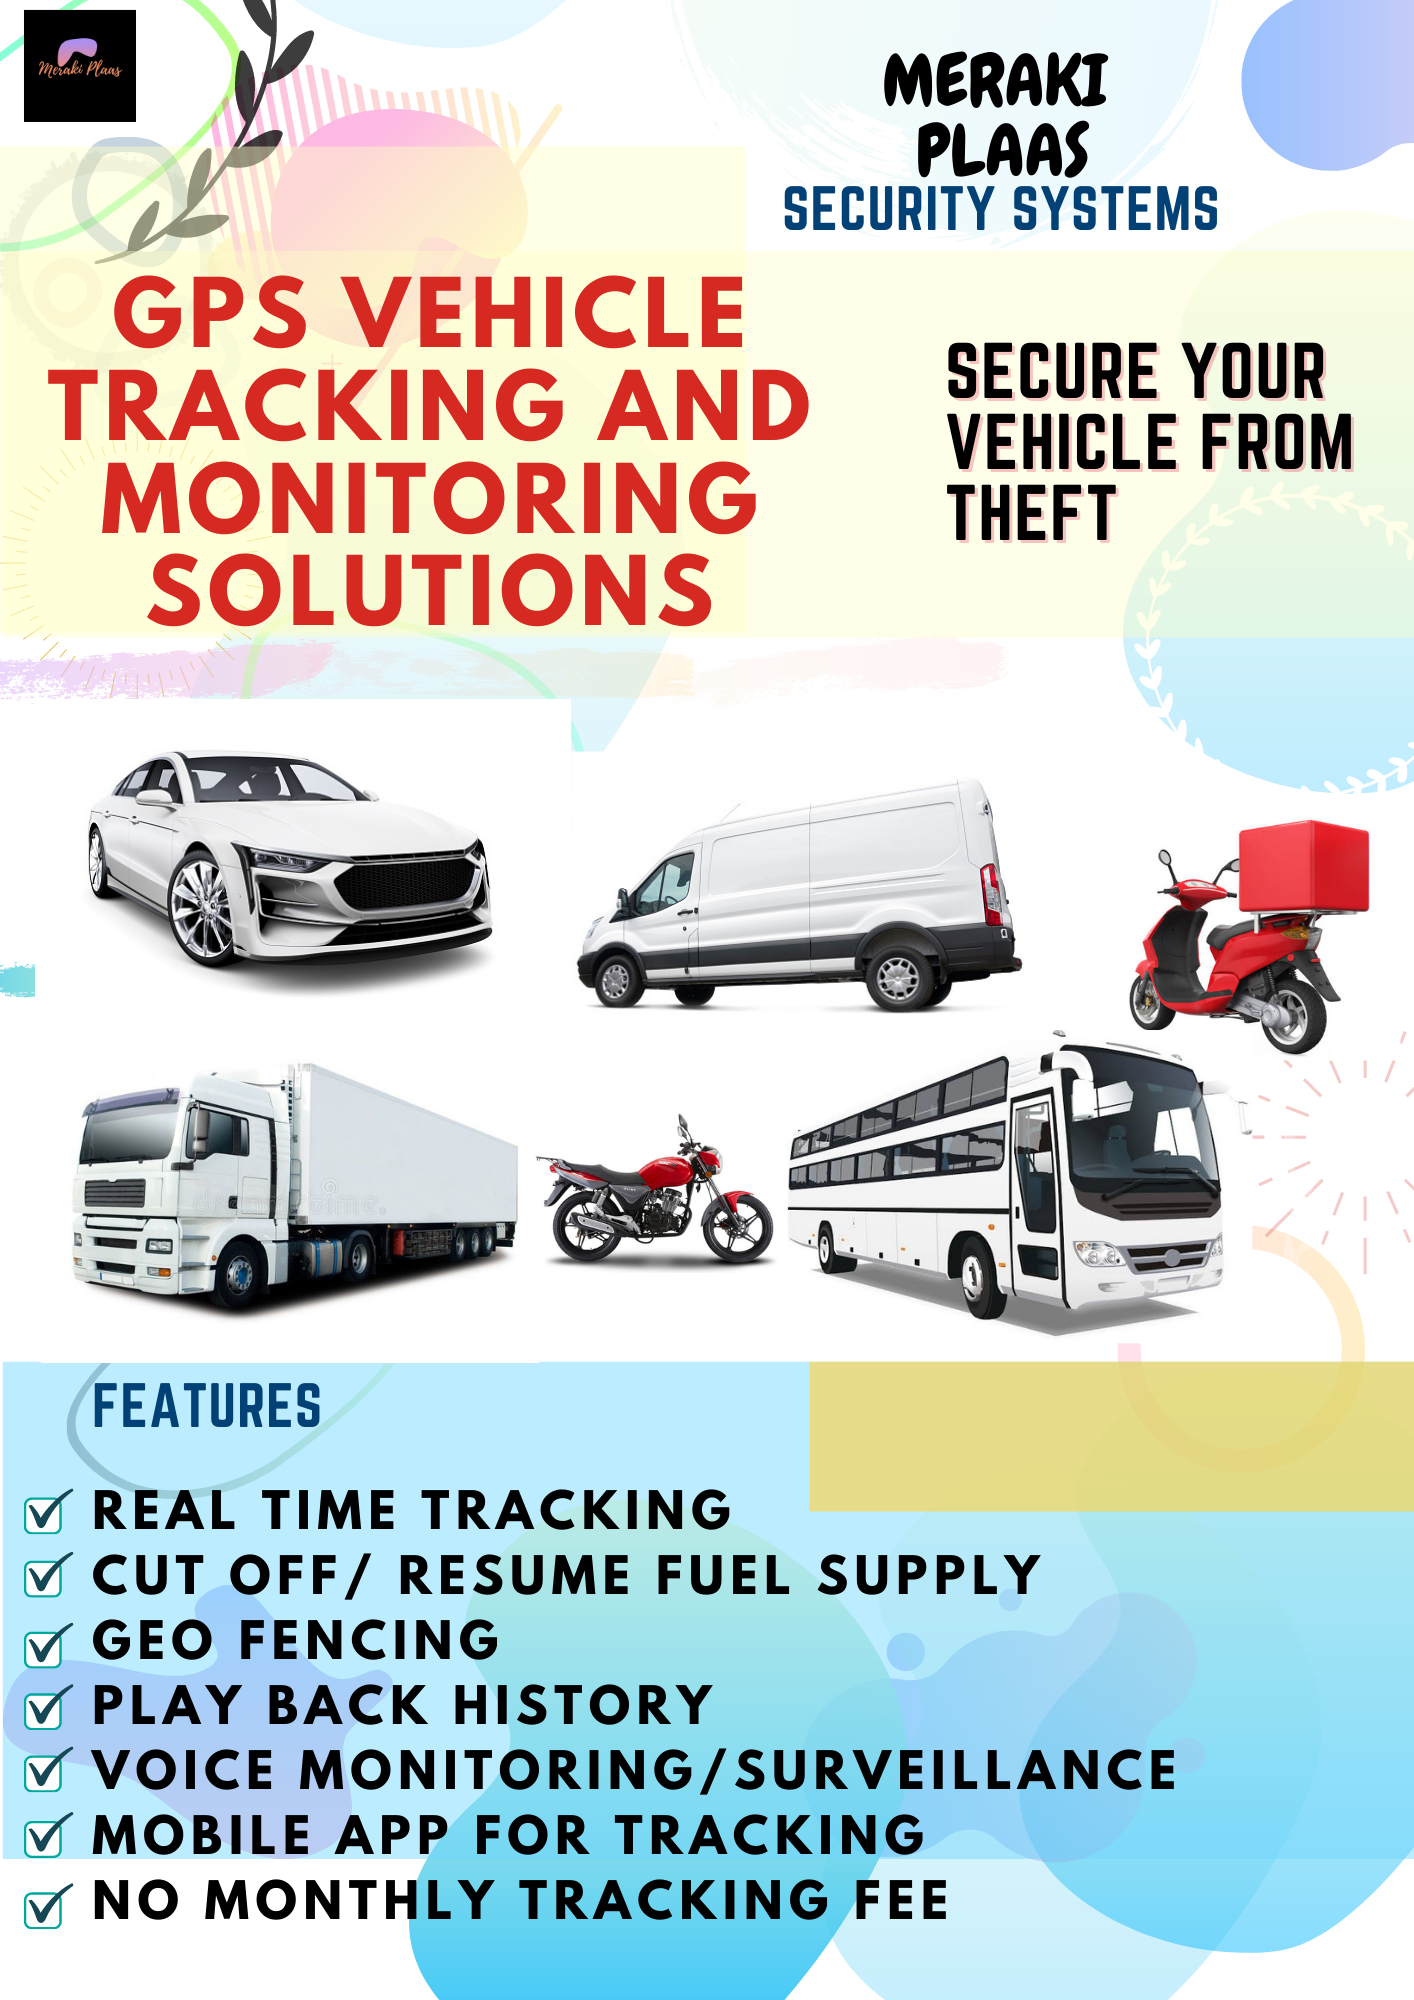 Learn Car Tracker installation Business and Become a Millionaire in Nigeria